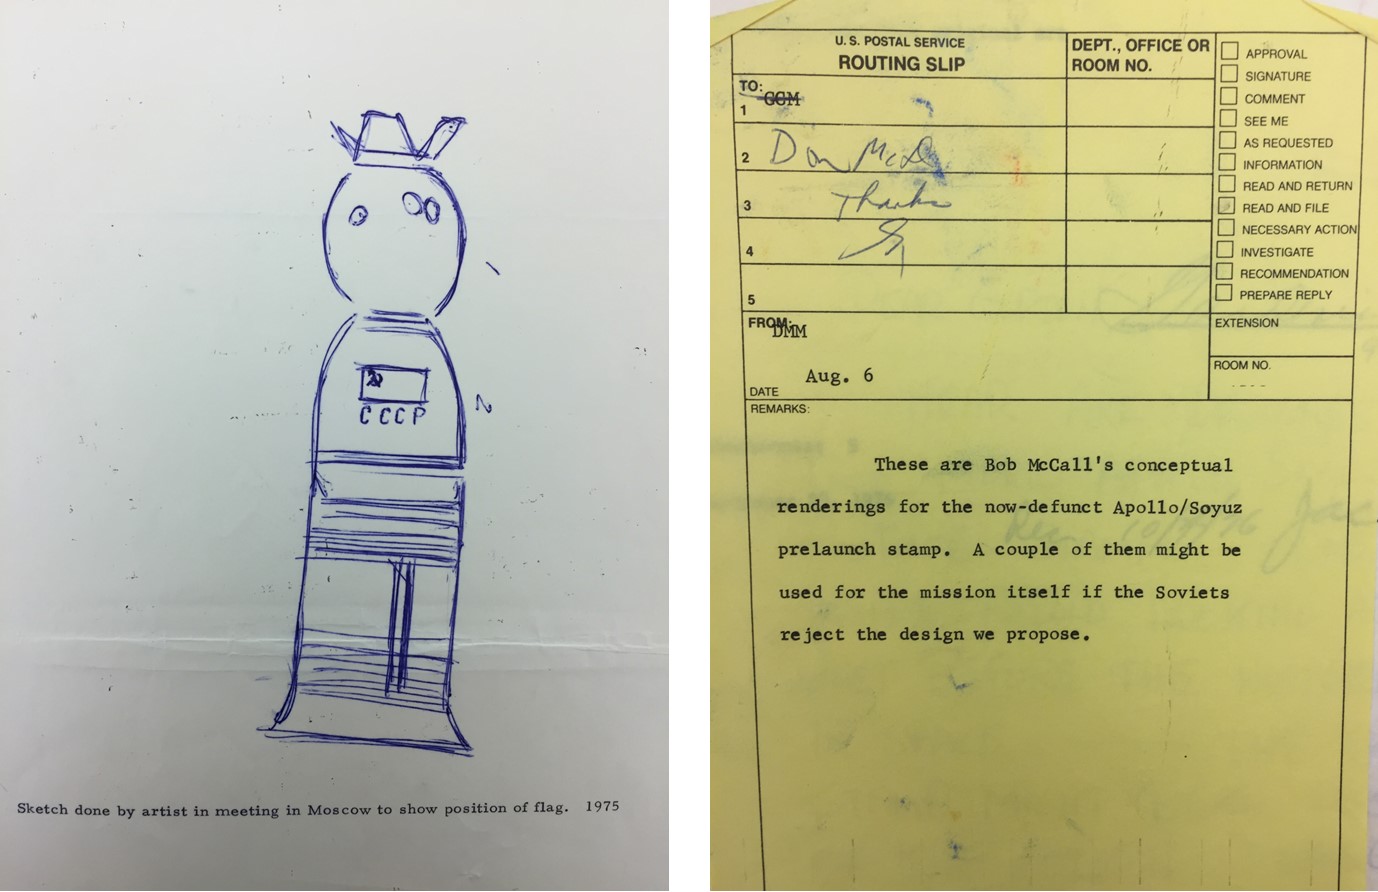 Left: white piece of paper with crude drawing of rocket in blue ink Right: yellow routing slip with printed message describing “conceptual renderings” of rocket 